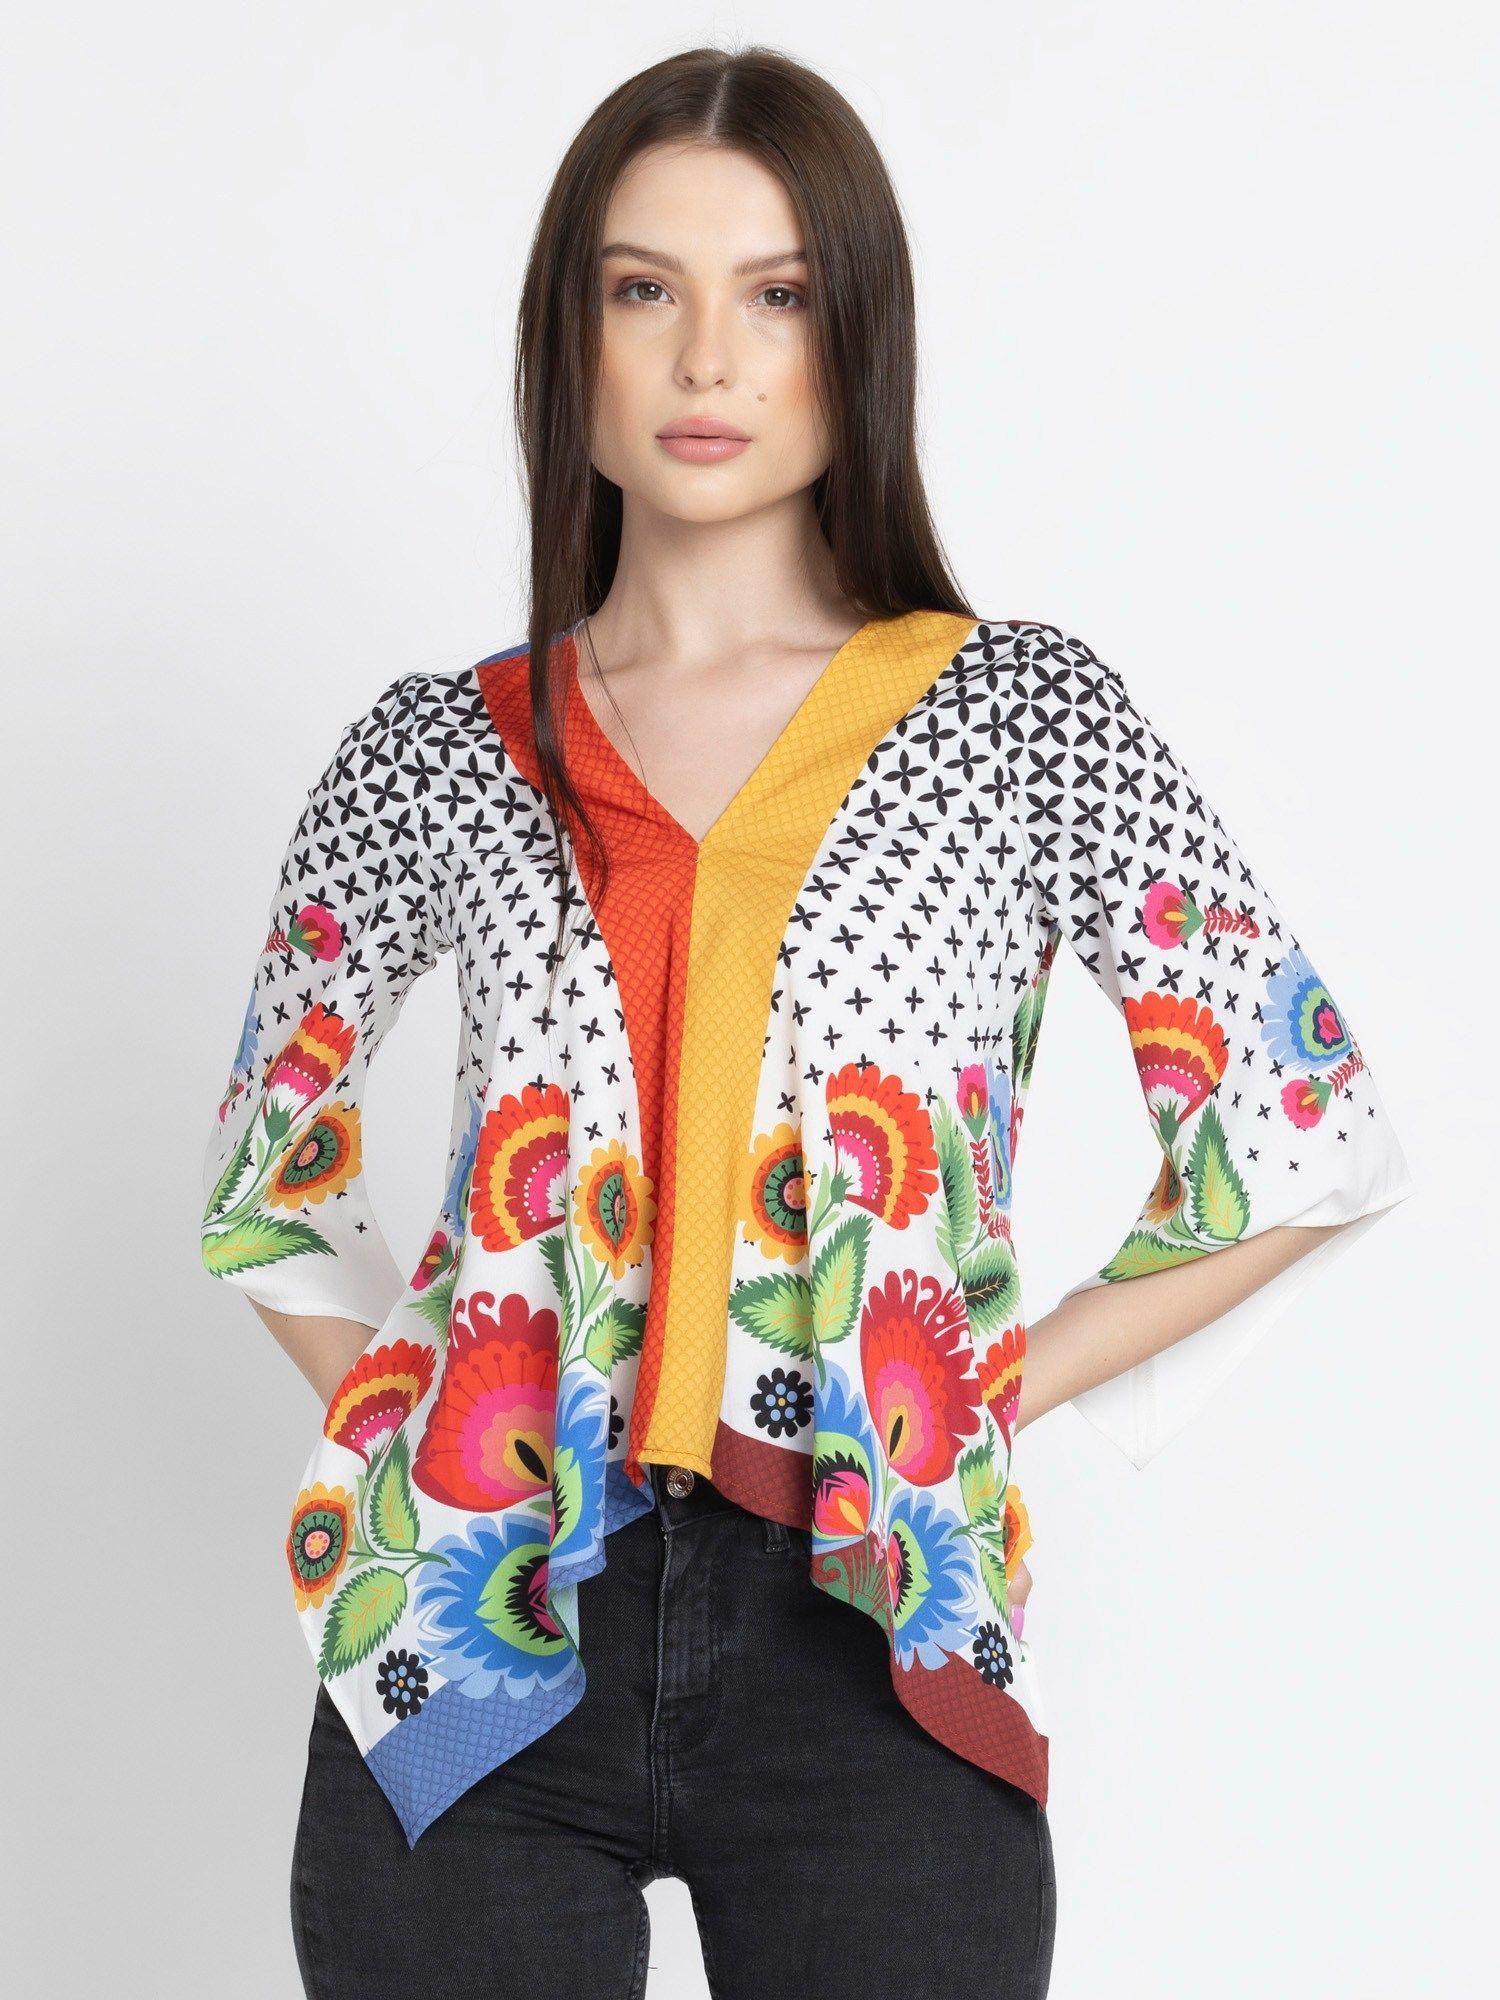 v-neck white floral printed long sleeves casual top for women